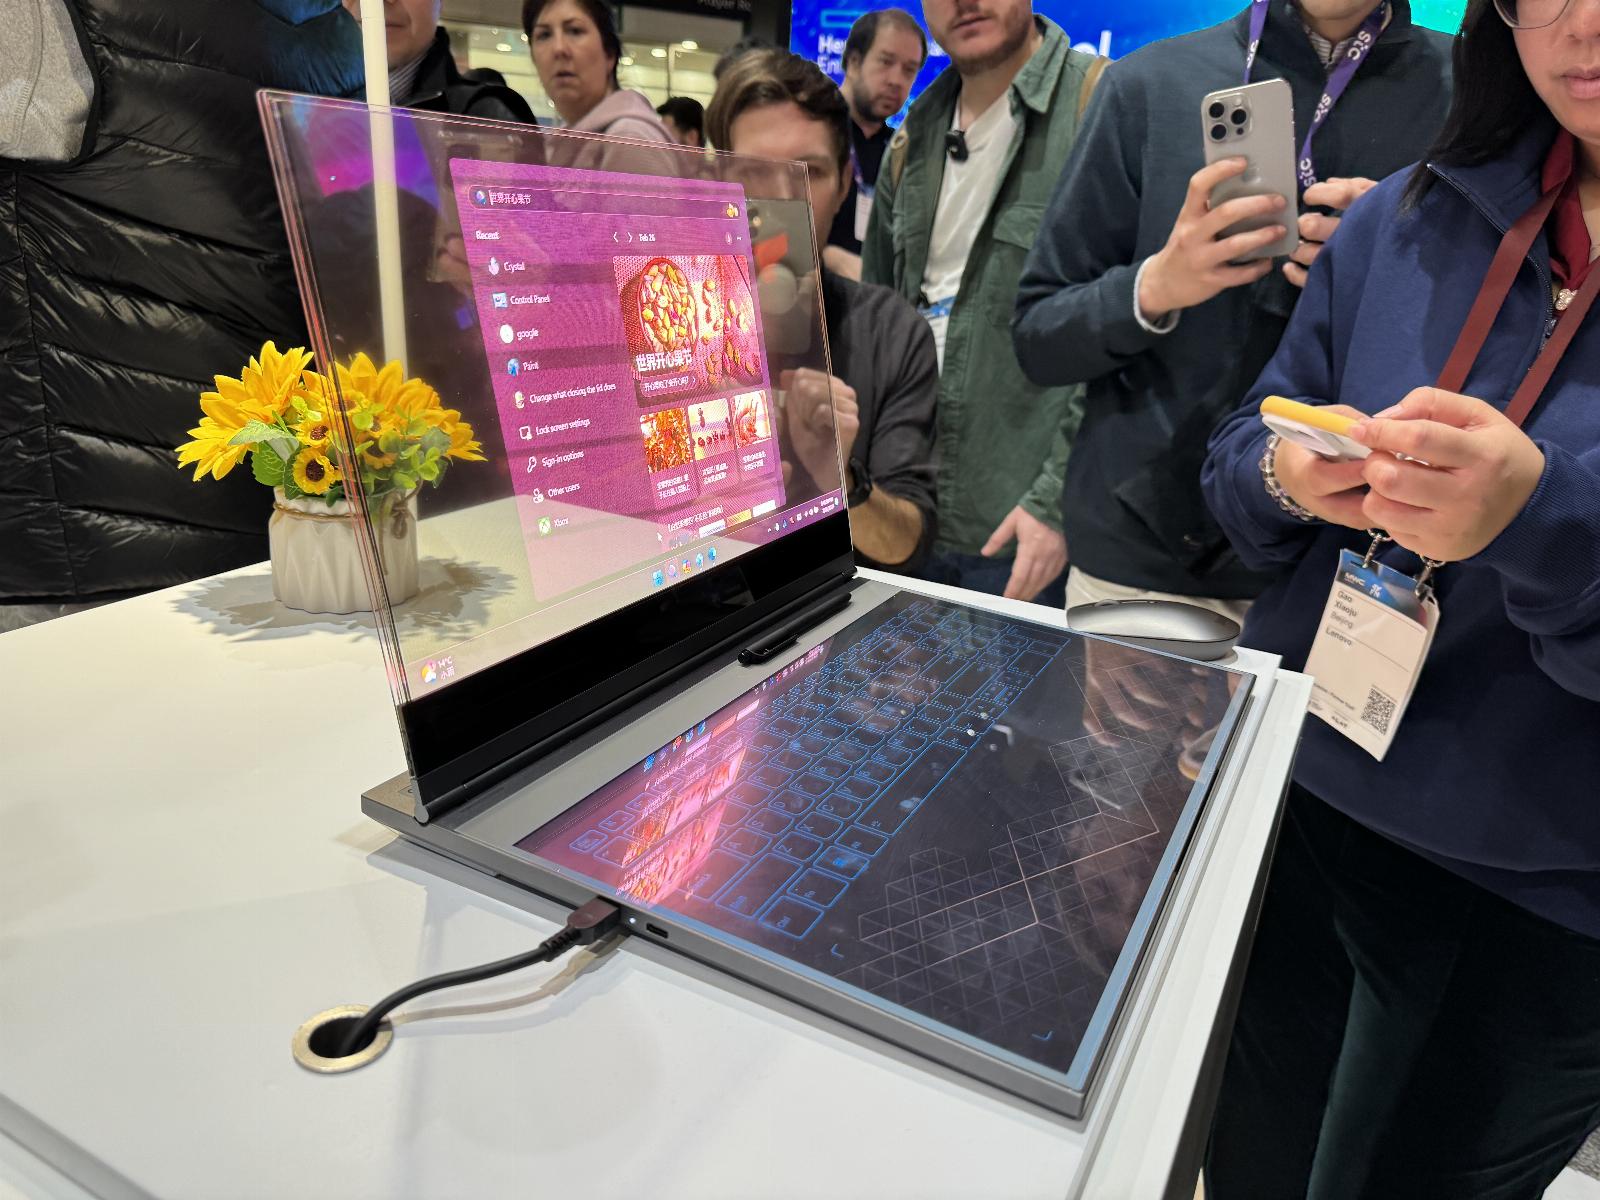 Lenovo’s laptop concept is fully transparent, but the point isn’t entirely clear